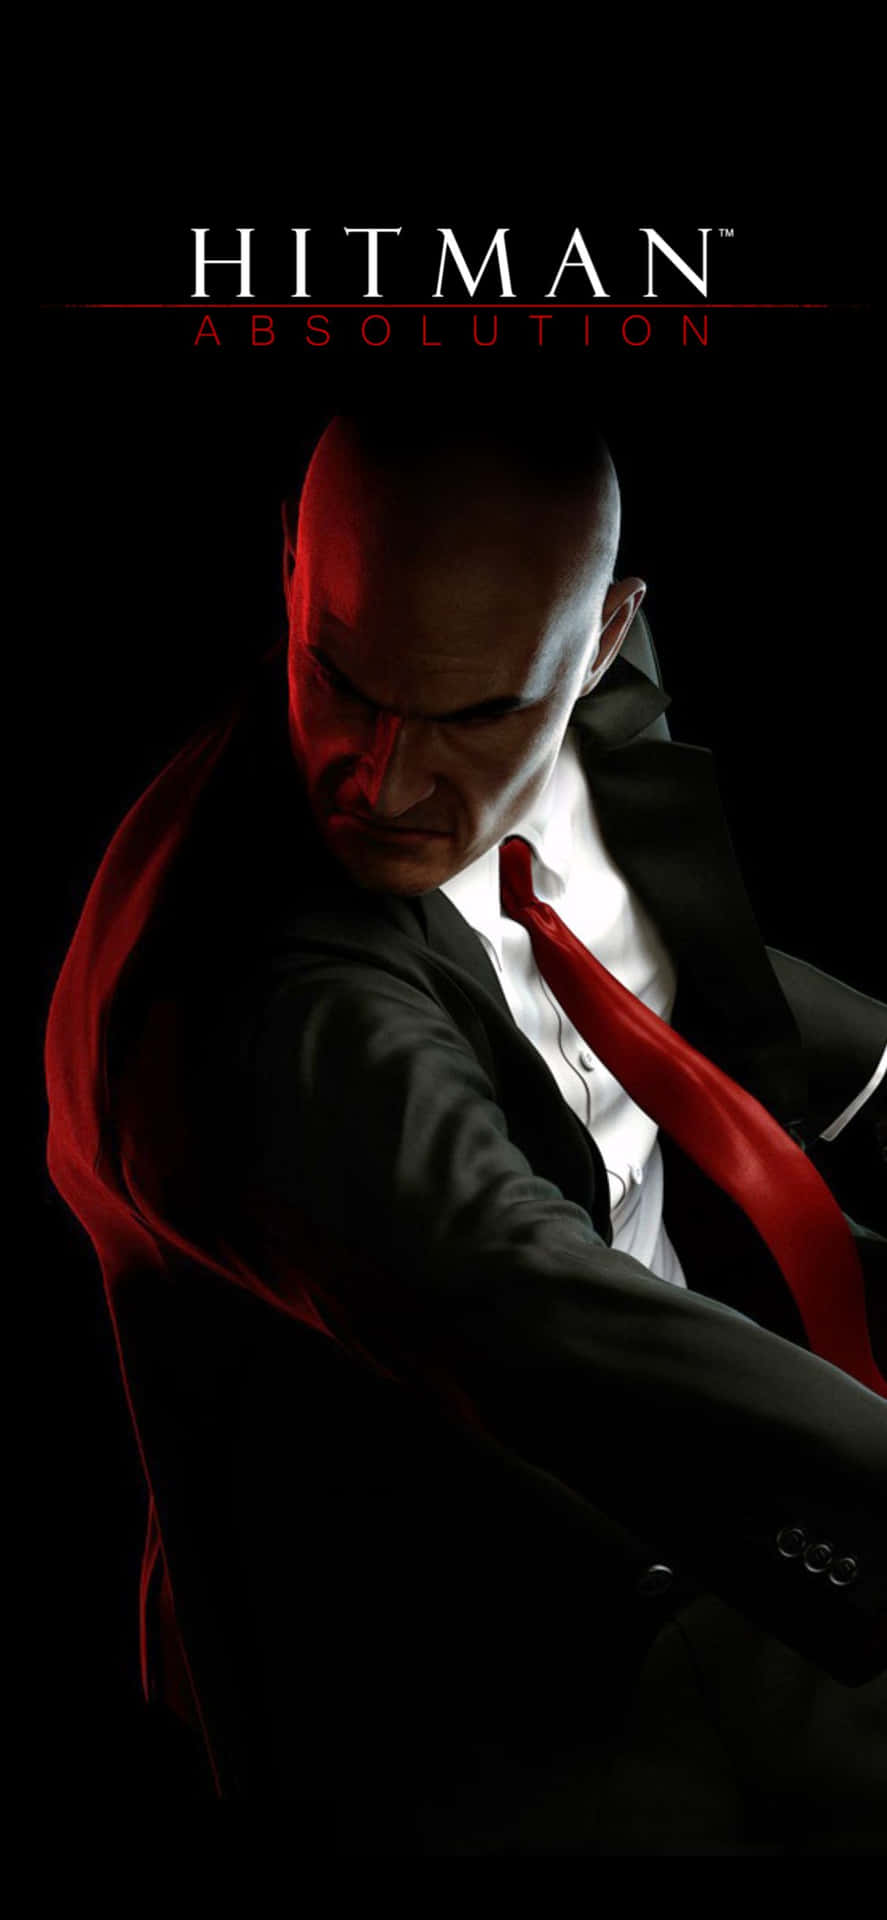 Agent 47 in Hitman Absolution ready for the toughest mission on an iPhone X